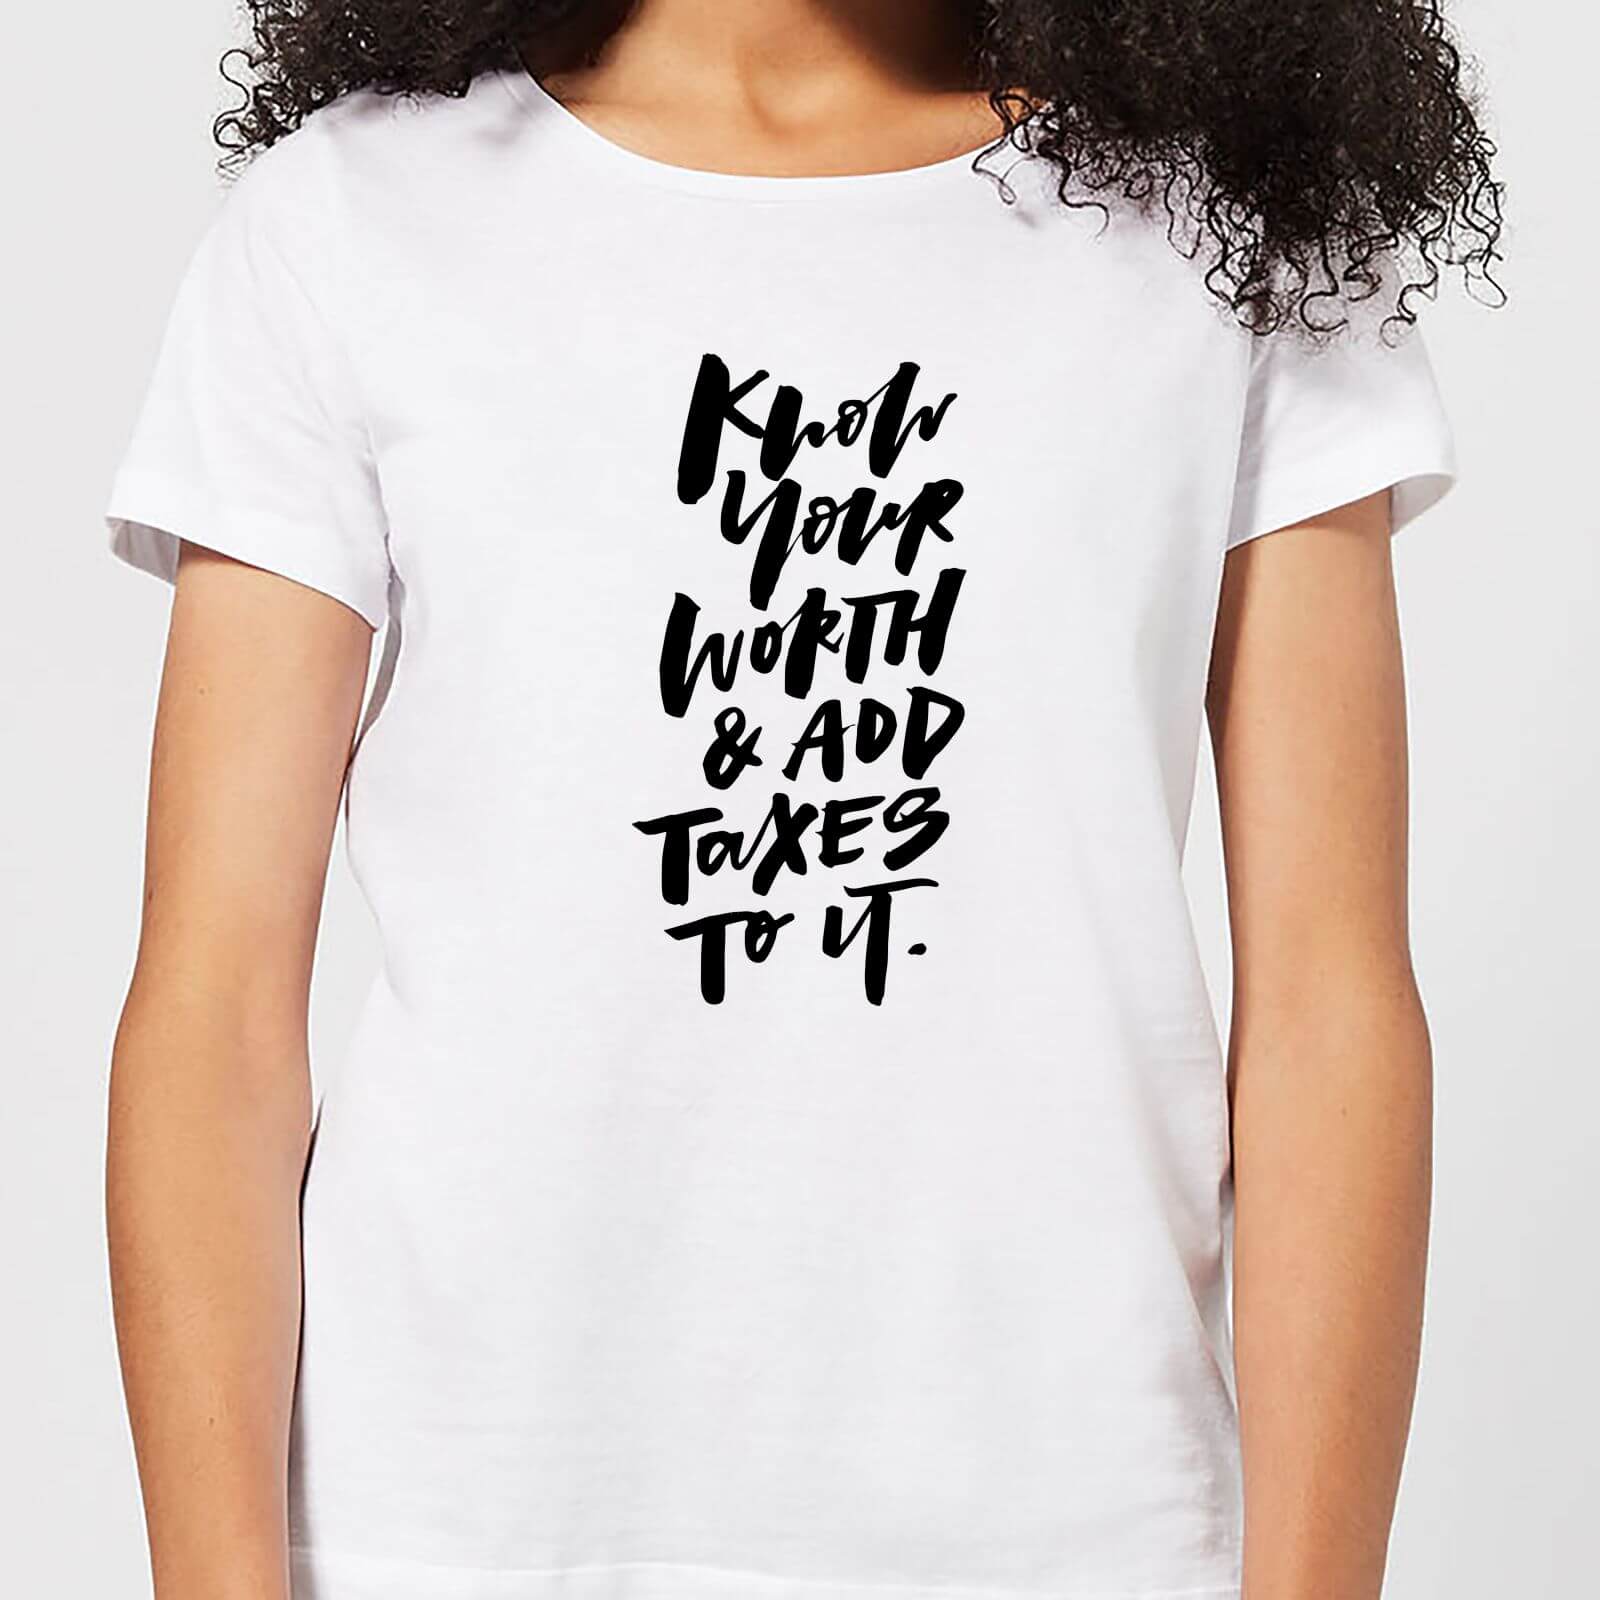 Know Your Worth and Add Taxes To It Women's T-Shirt - White - XL - White